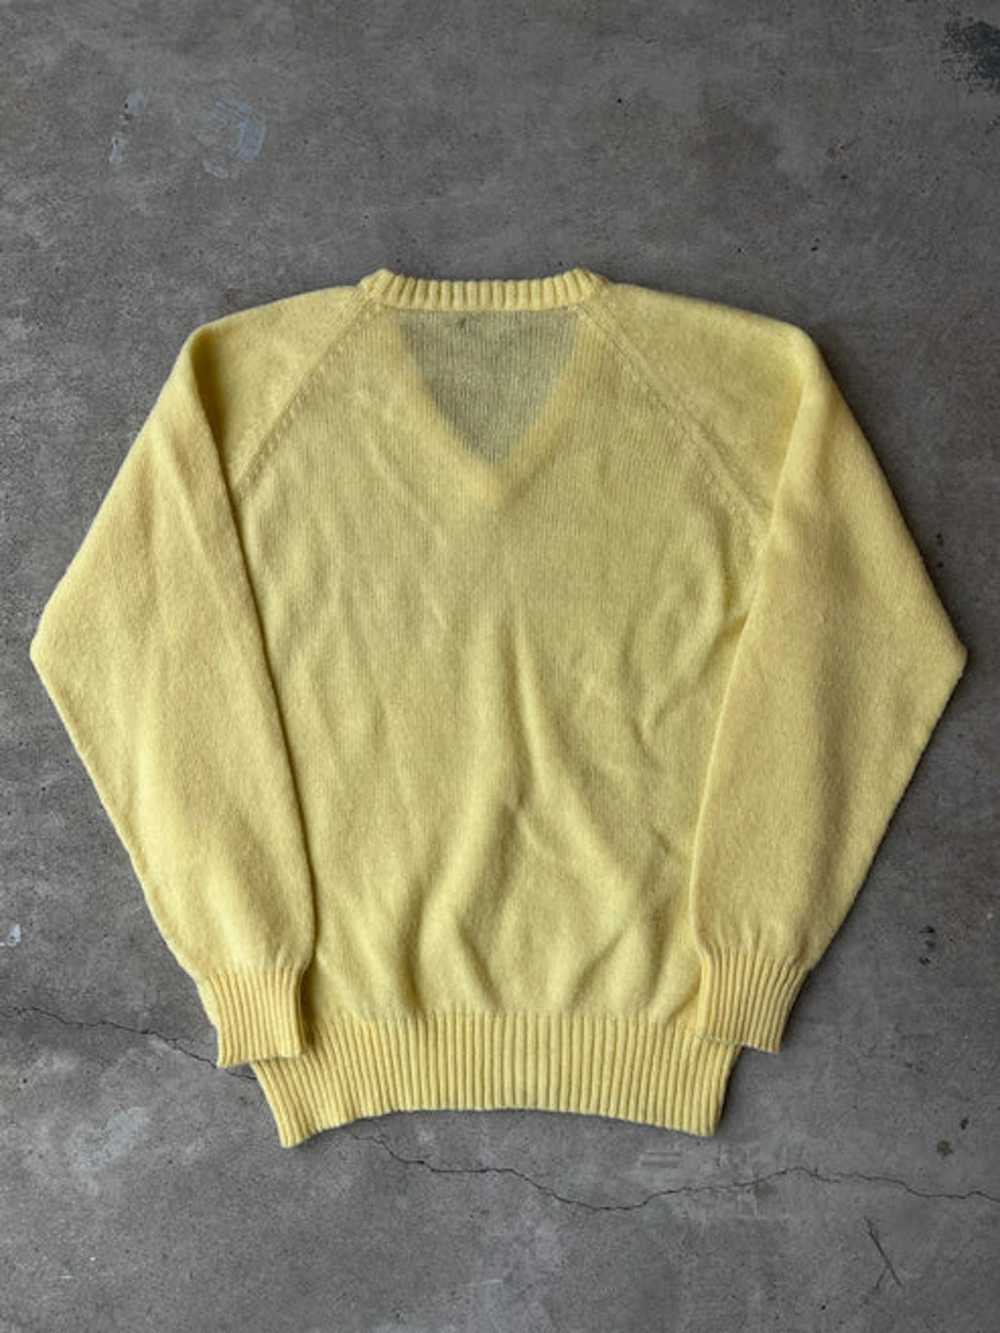 Vintage 00s Yellow Knitted Sweater - image 3